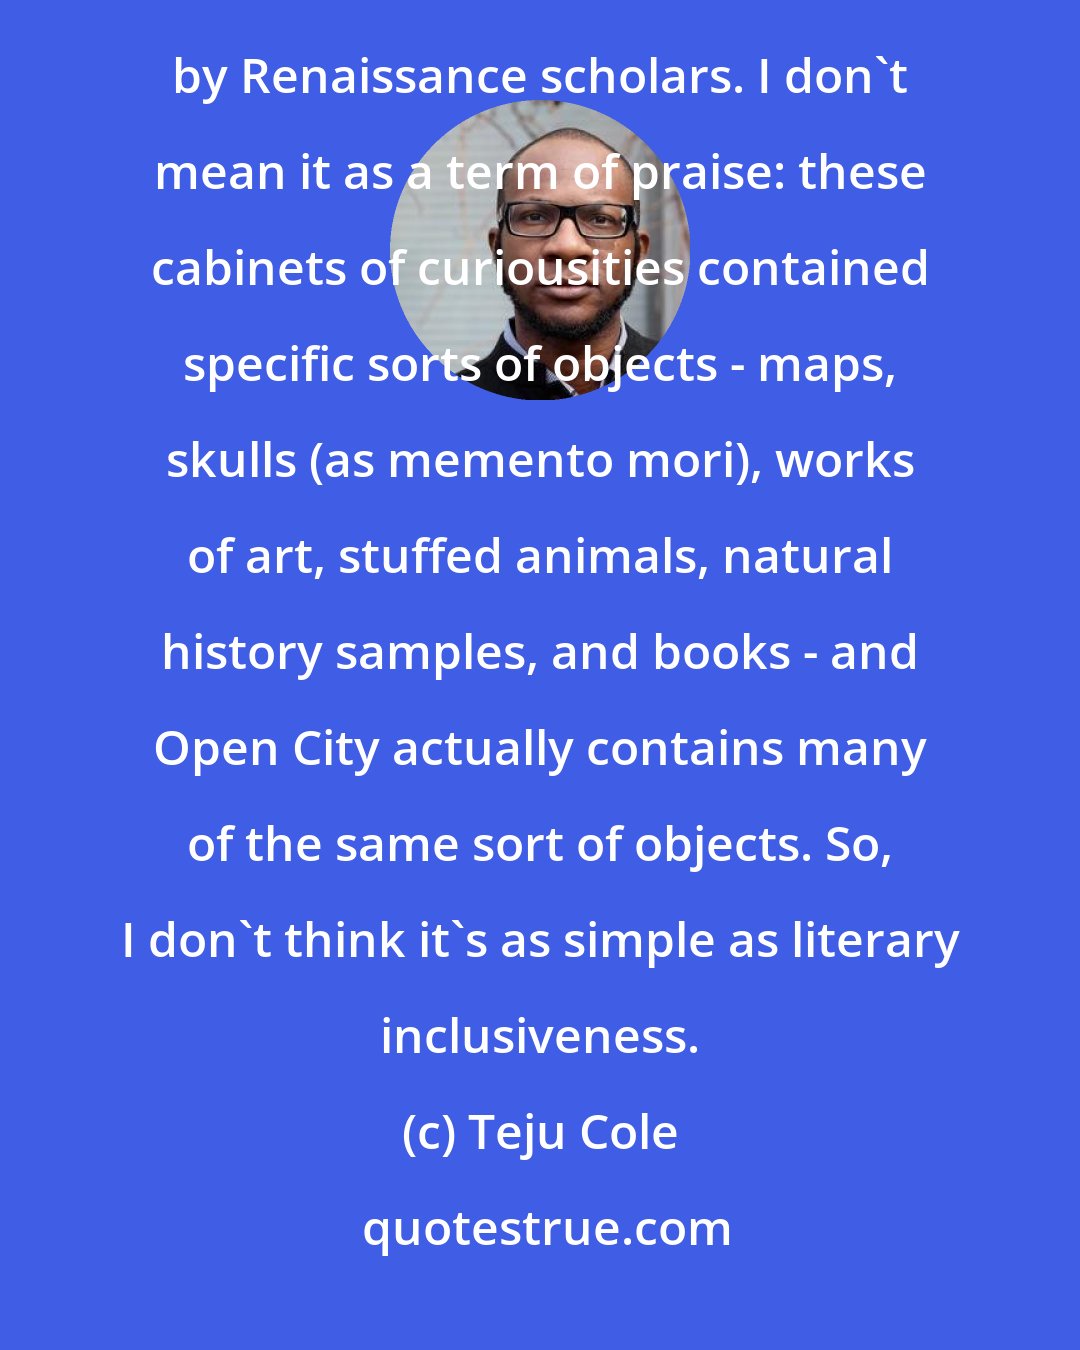 Teju Cole: In a sense, Open City is a kind of Wunderkammer, one of those little rooms assembled with bric-a-brac by Renaissance scholars. I don't mean it as a term of praise: these cabinets of curiousities contained specific sorts of objects - maps, skulls (as memento mori), works of art, stuffed animals, natural history samples, and books - and Open City actually contains many of the same sort of objects. So, I don't think it's as simple as literary inclusiveness.